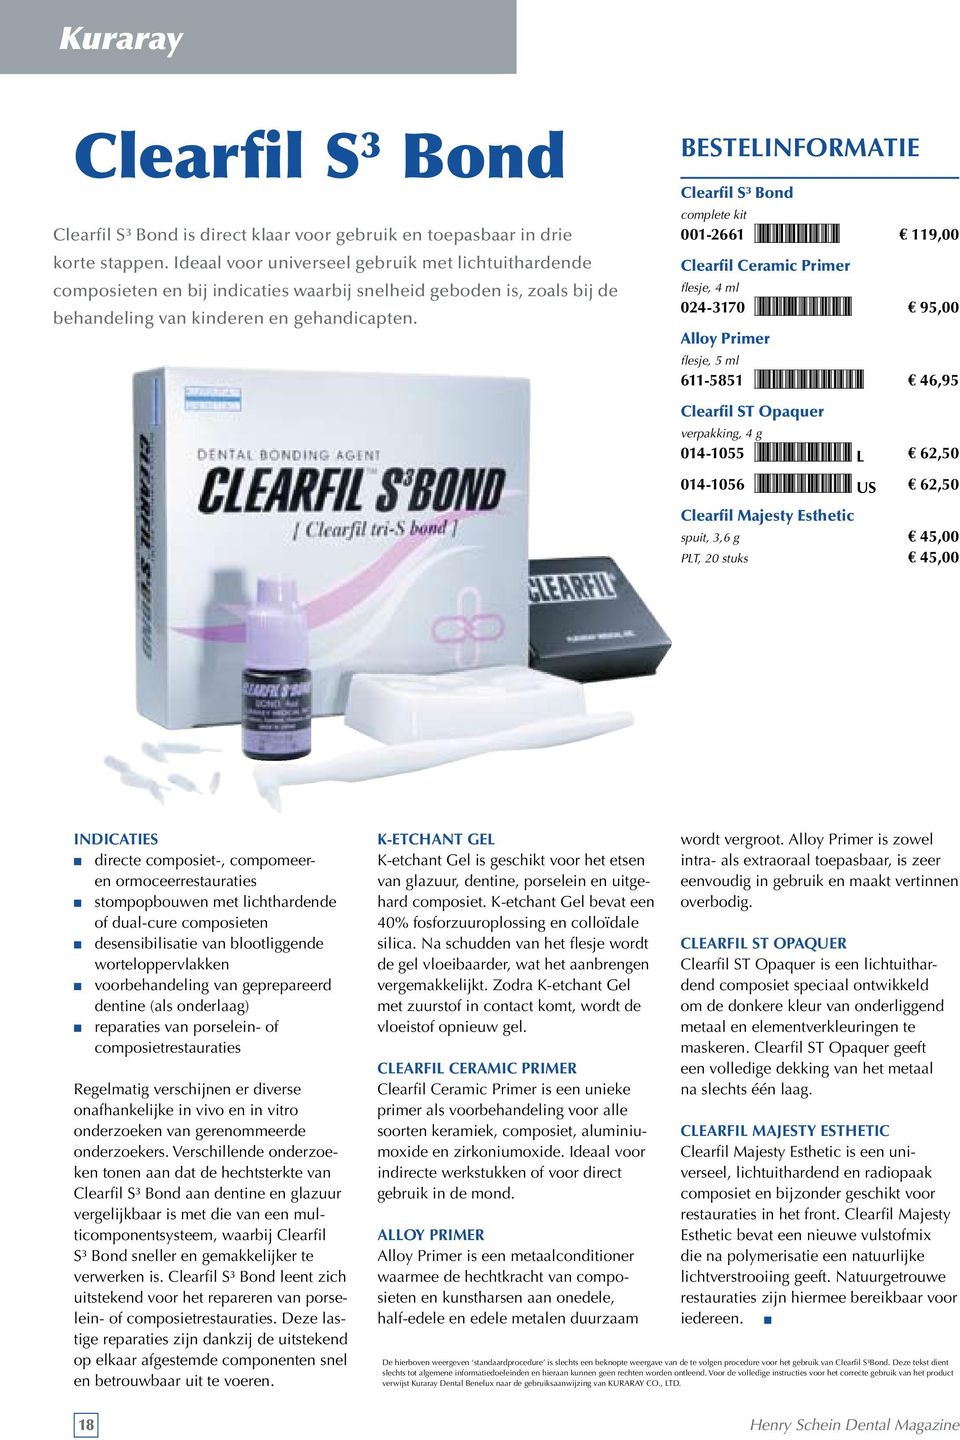 Clearfil S³ Bond complete kit 001-2661 *12661* 119,00 Clearfil Ceramic Primer flesje, 4 ml 024-3170 *243170* 95,00 Alloy Primer flesje, 5 ml 611-5851 *6115851* 46,95 Clearfil ST Opaquer verpakking, 4